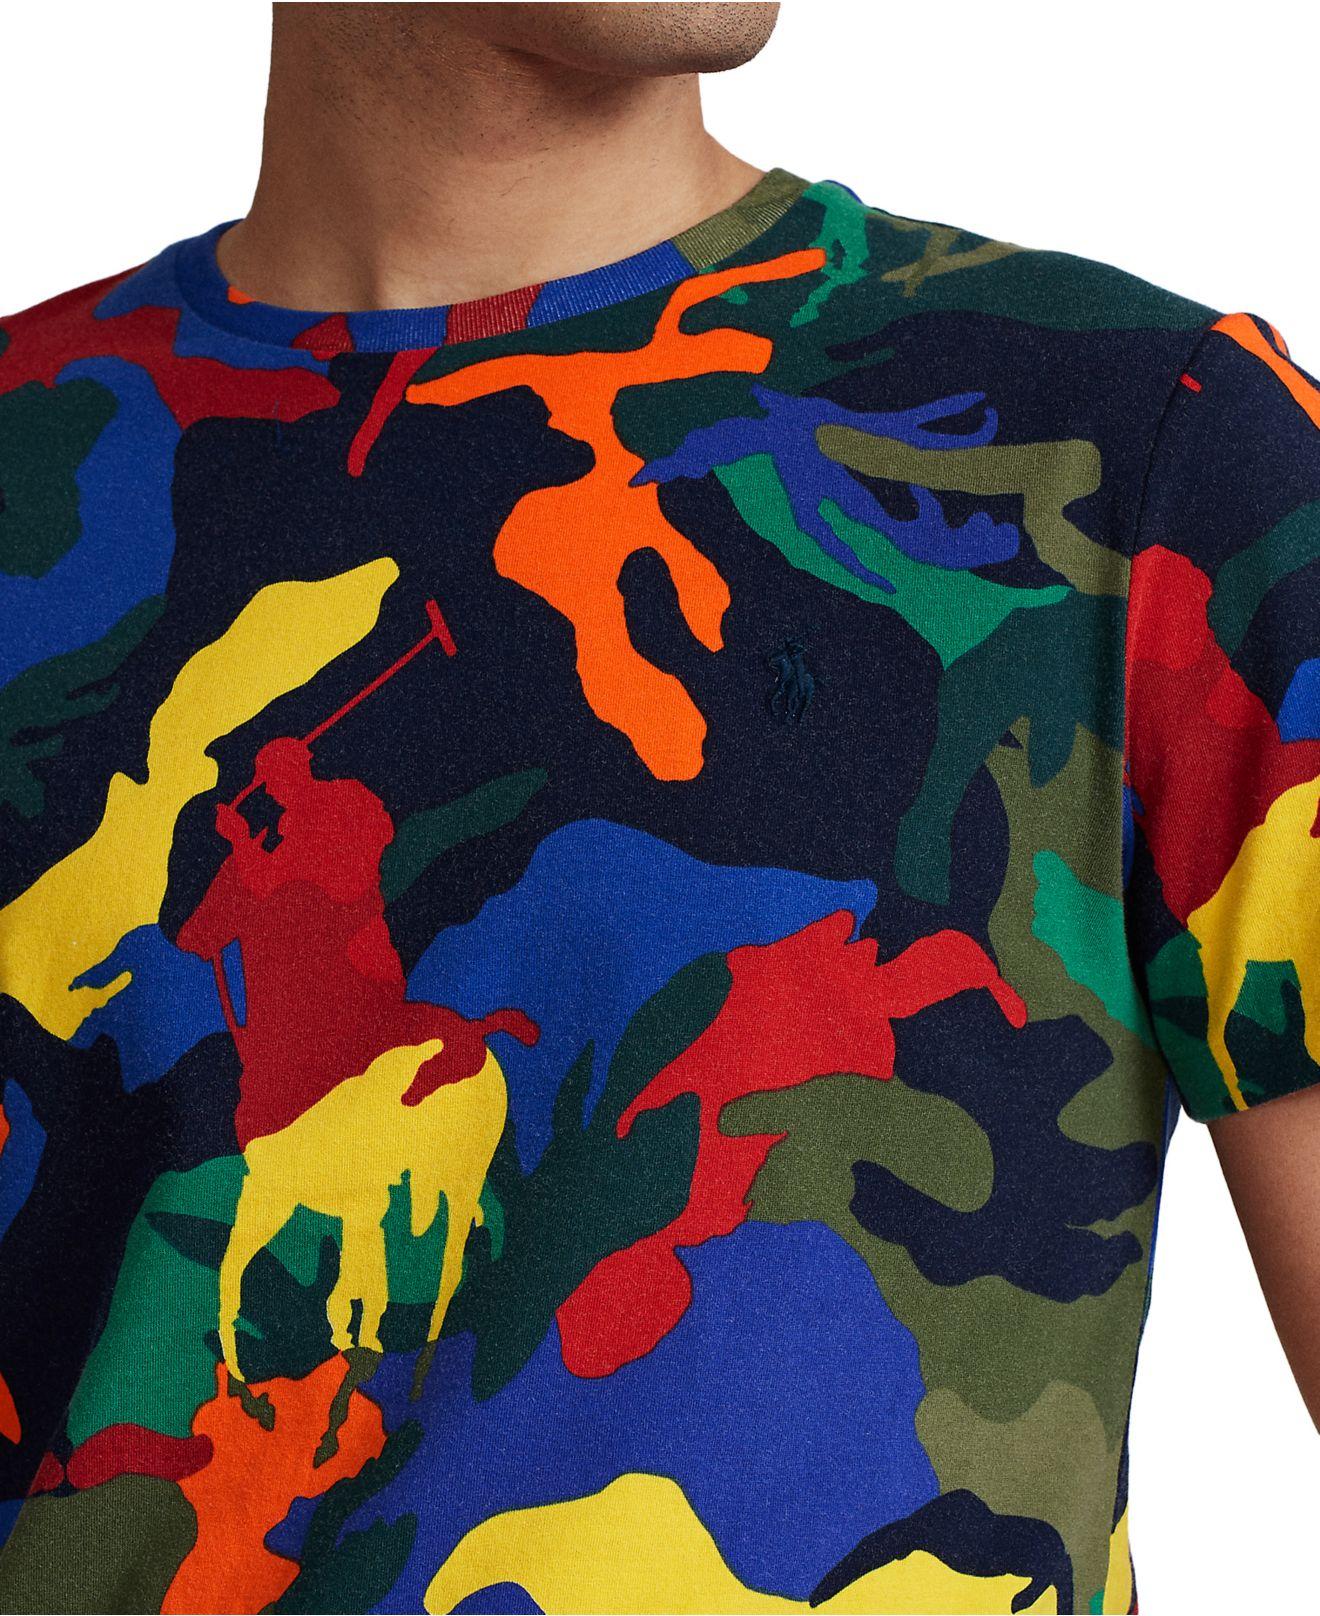 Polo Ralph Lauren Classic Fit-polo Pony Camo T-shirt for Men | Lyst